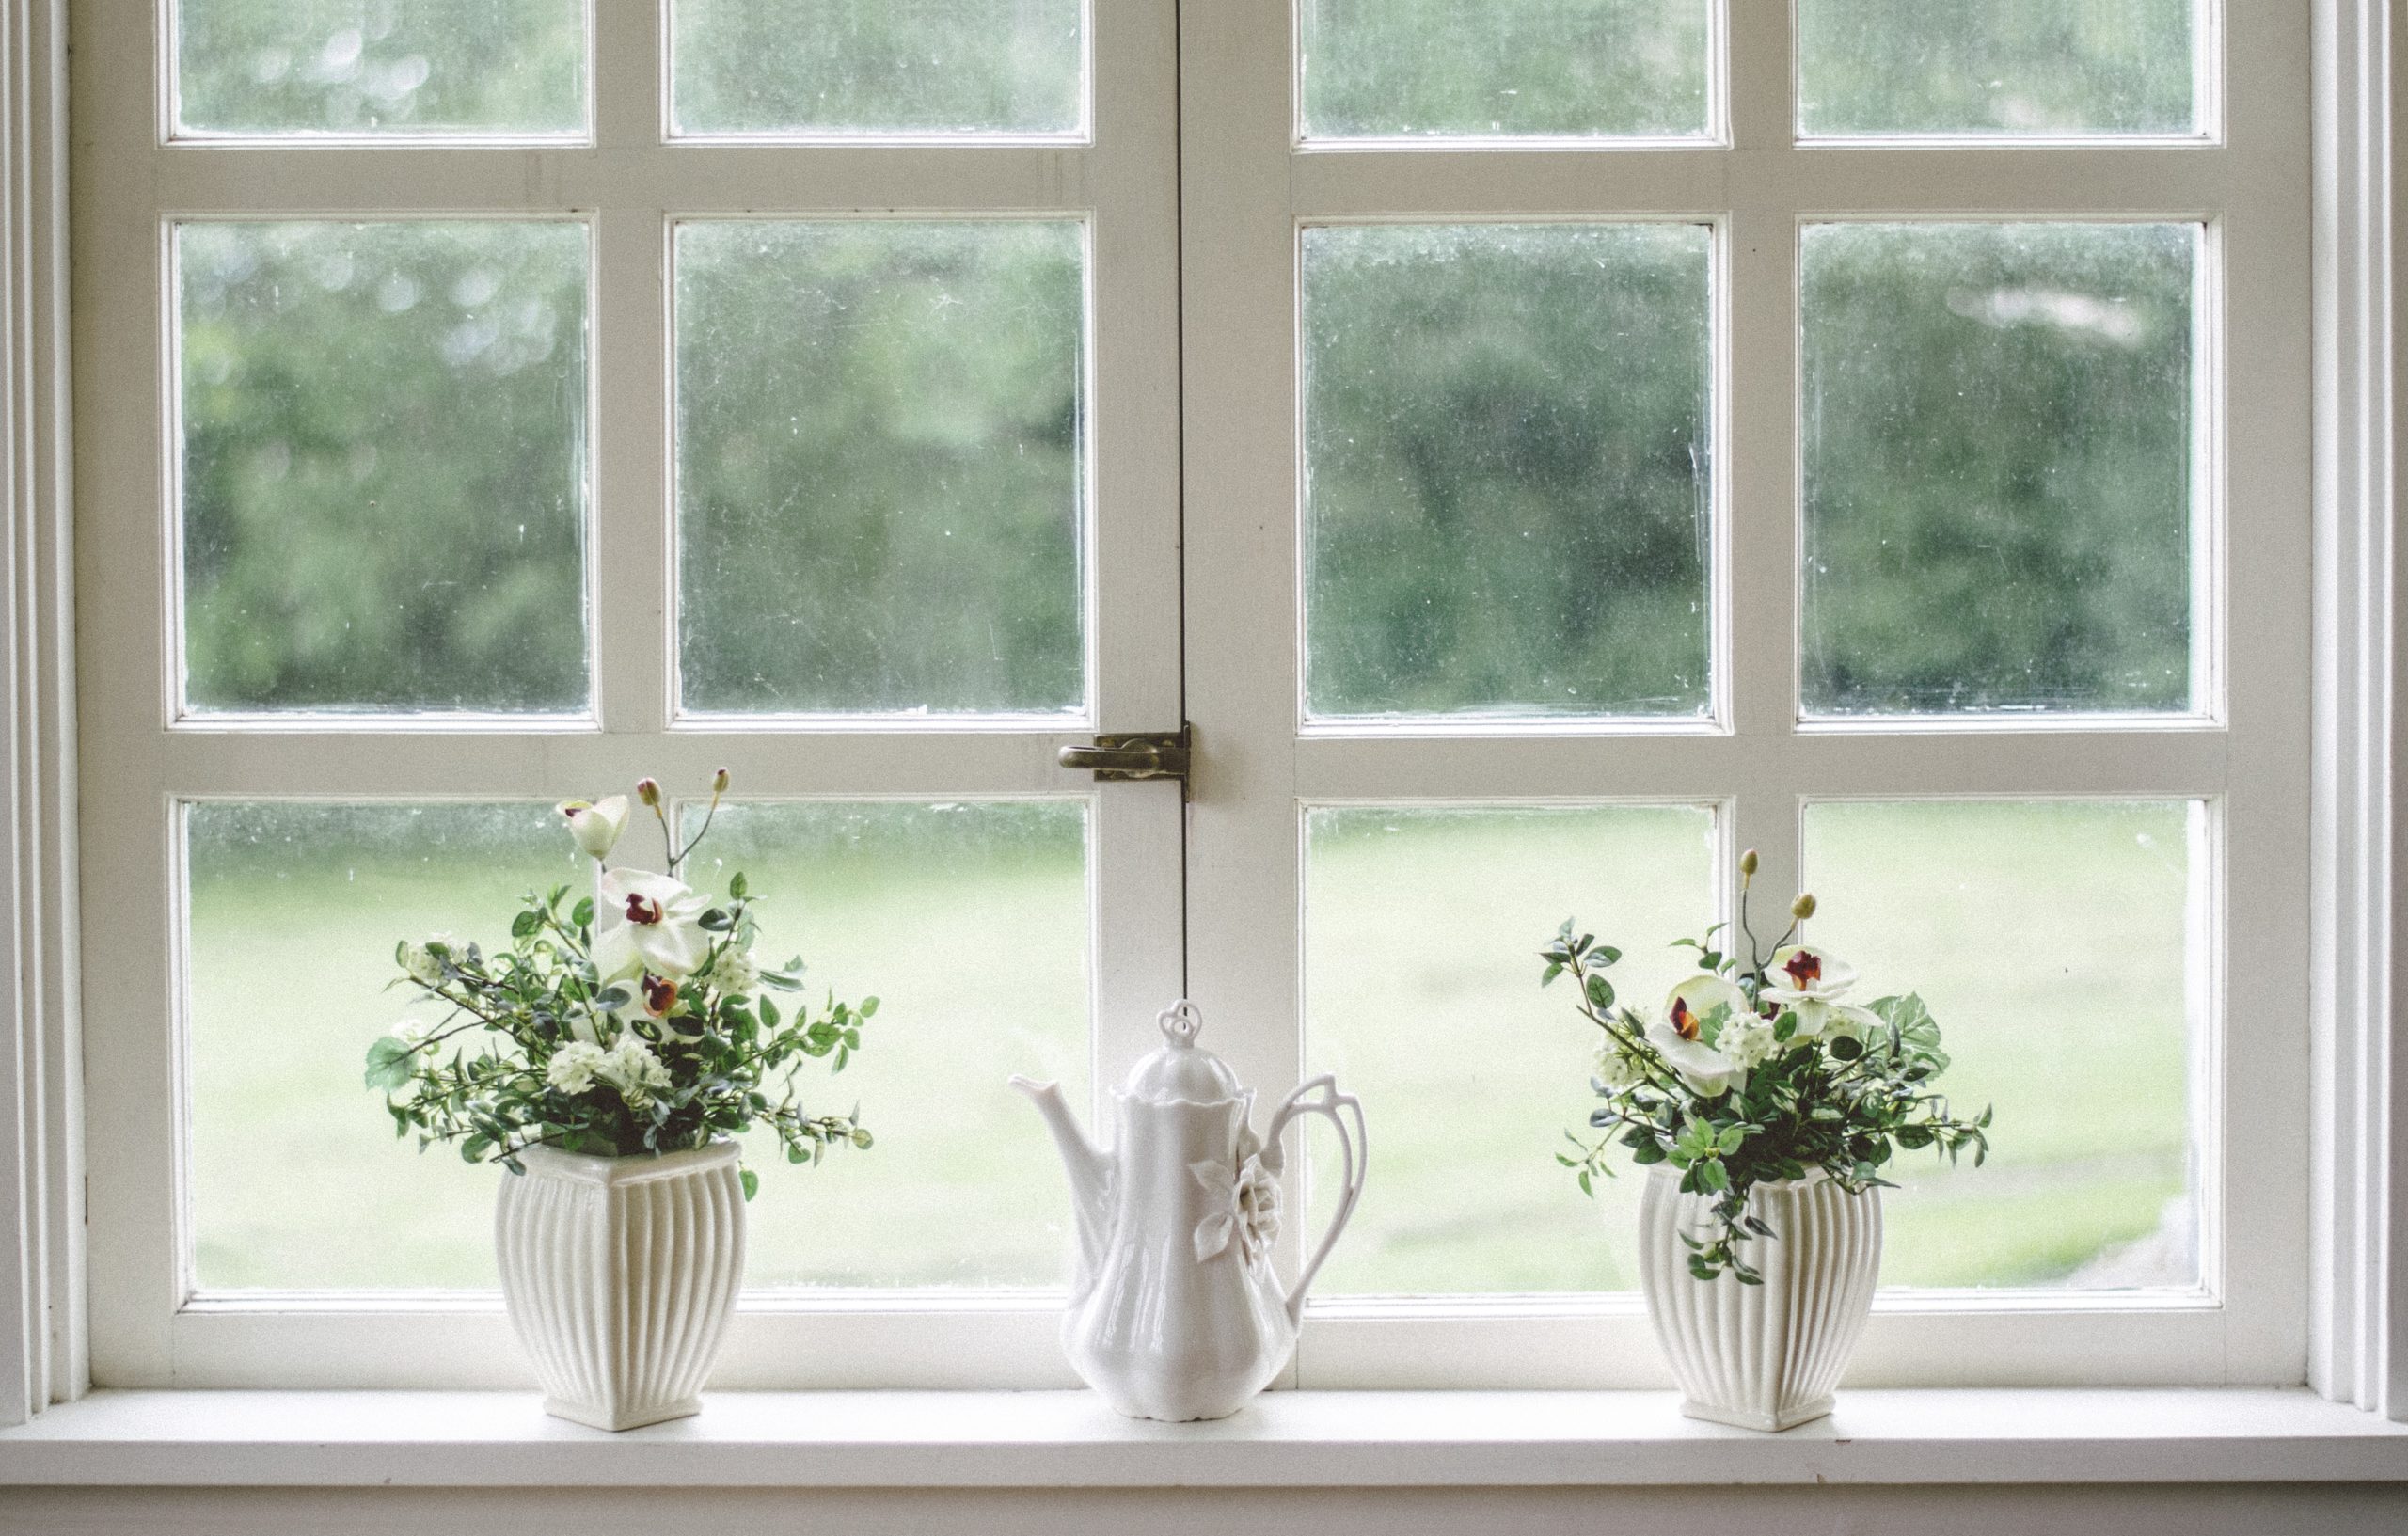 A window along with two flower pots and a tea pot